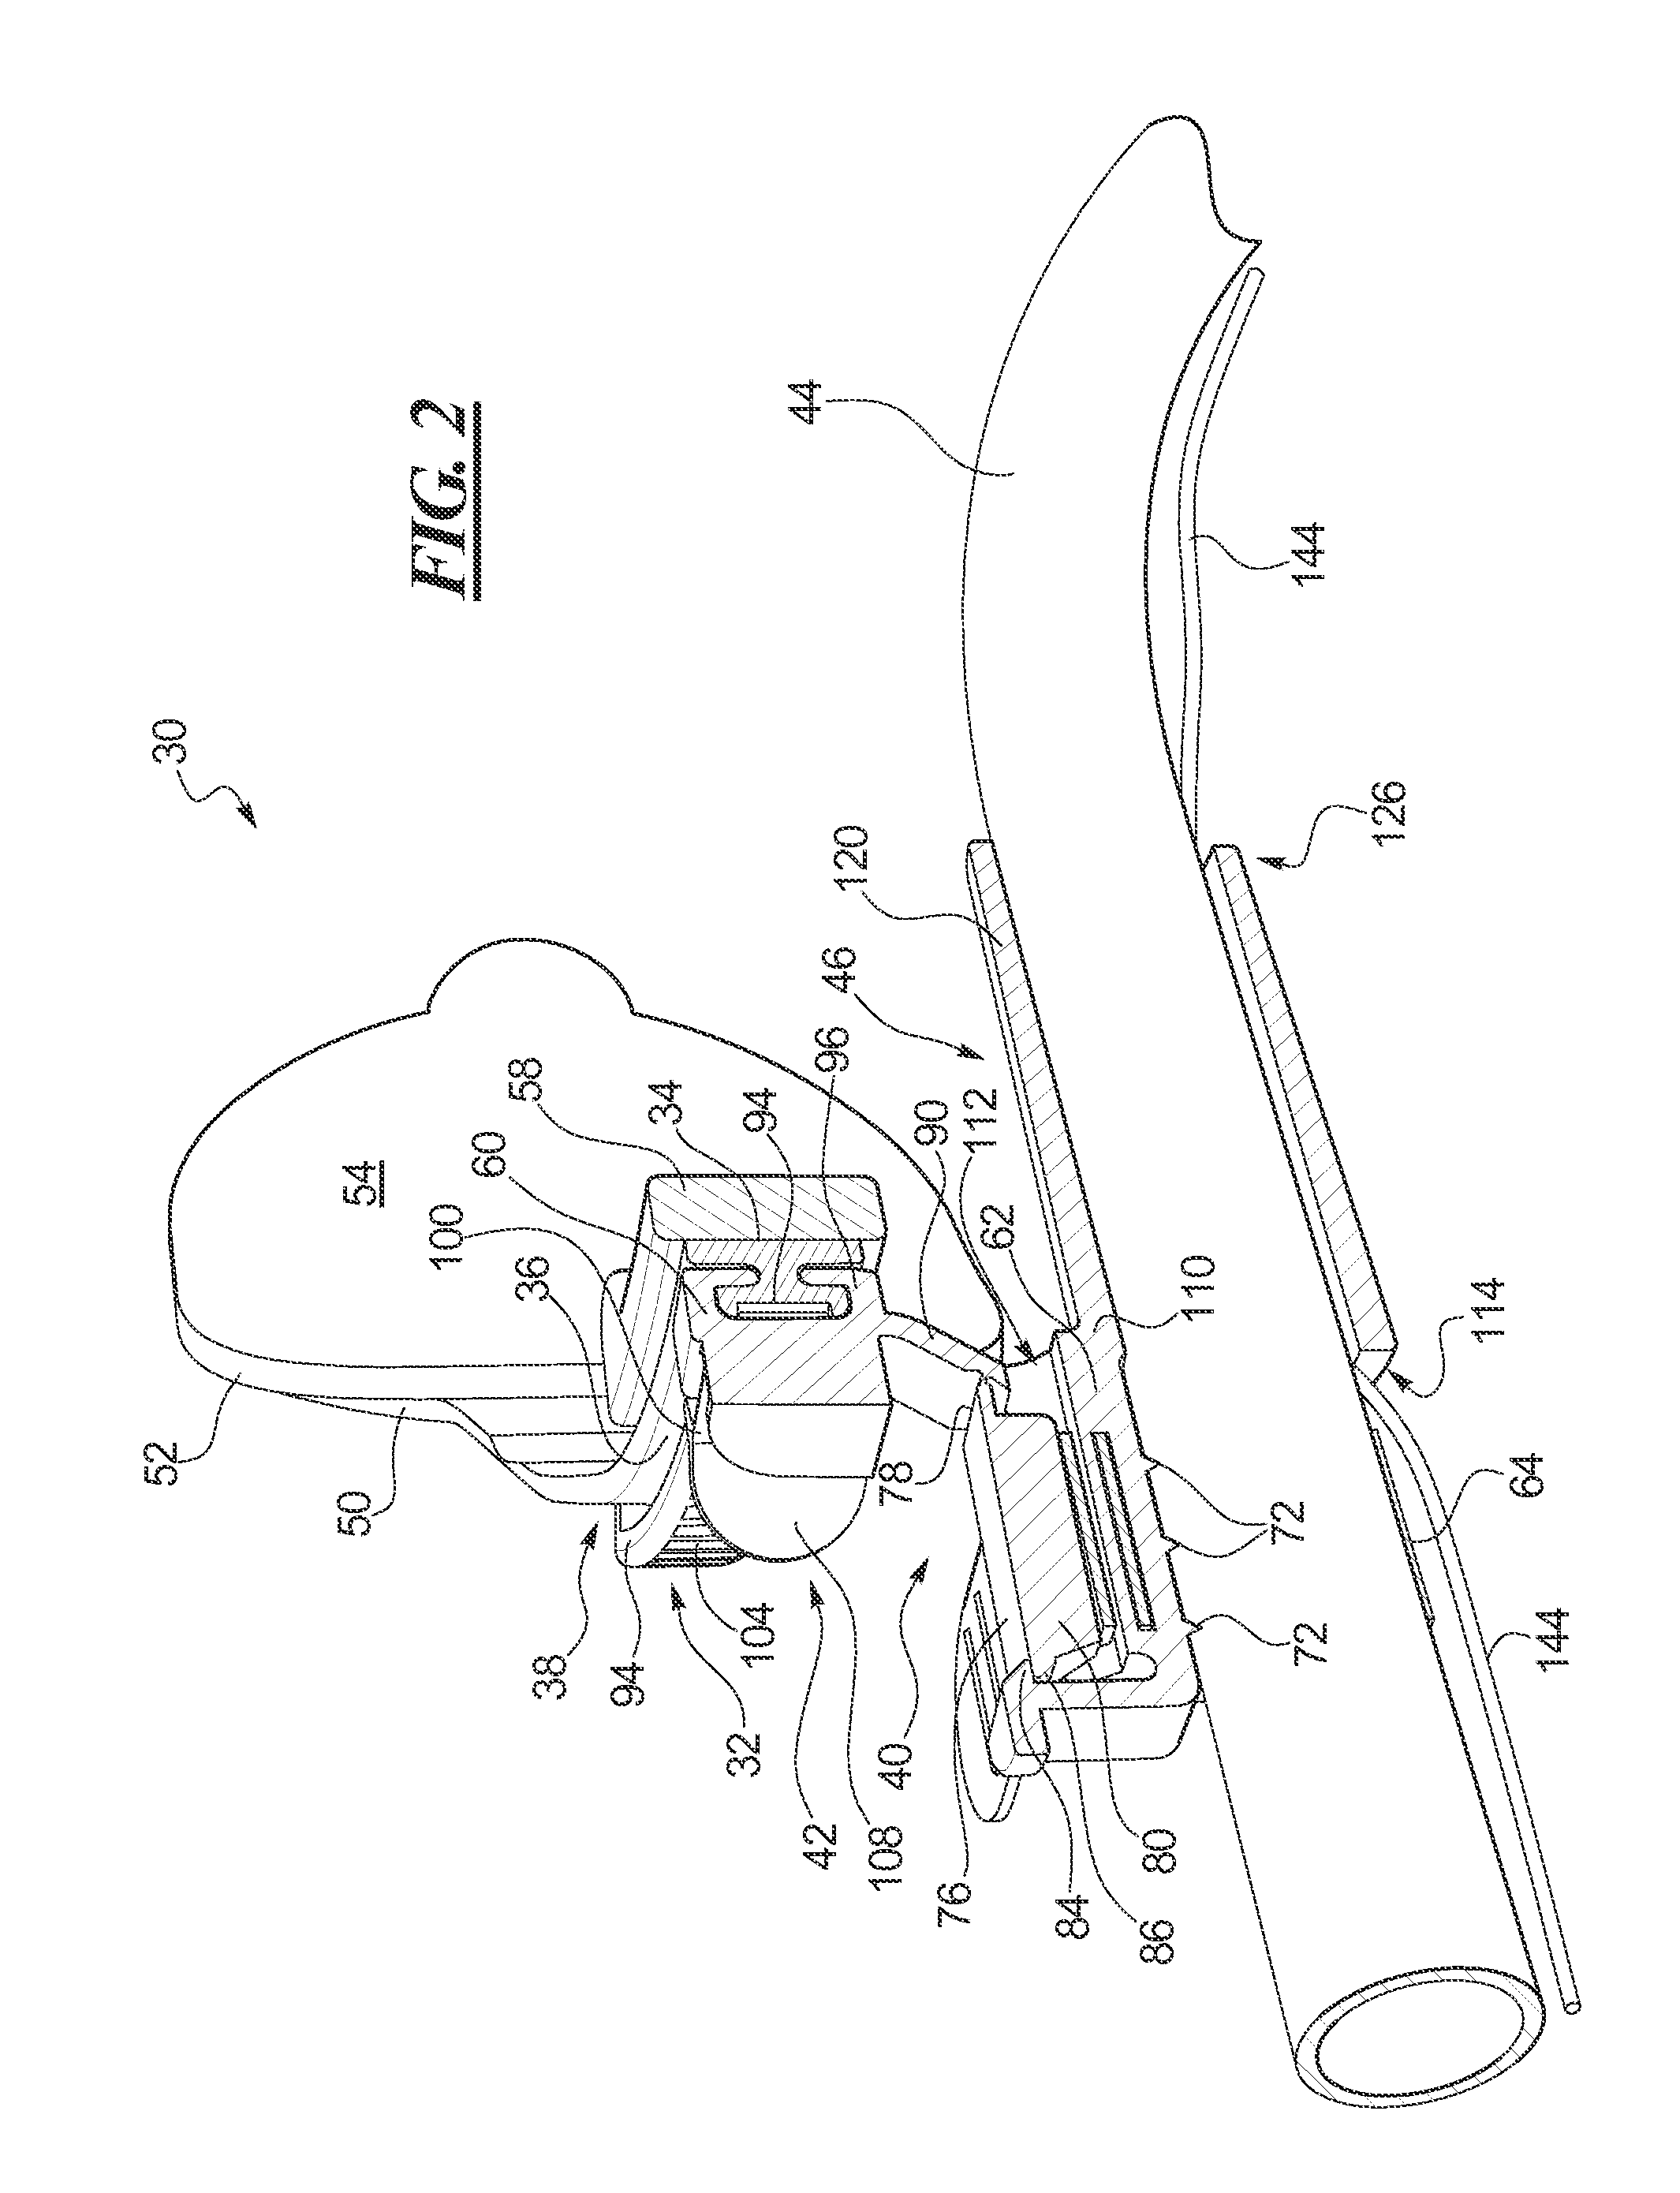 Endotracheal Tube Holding Device with Bite Block